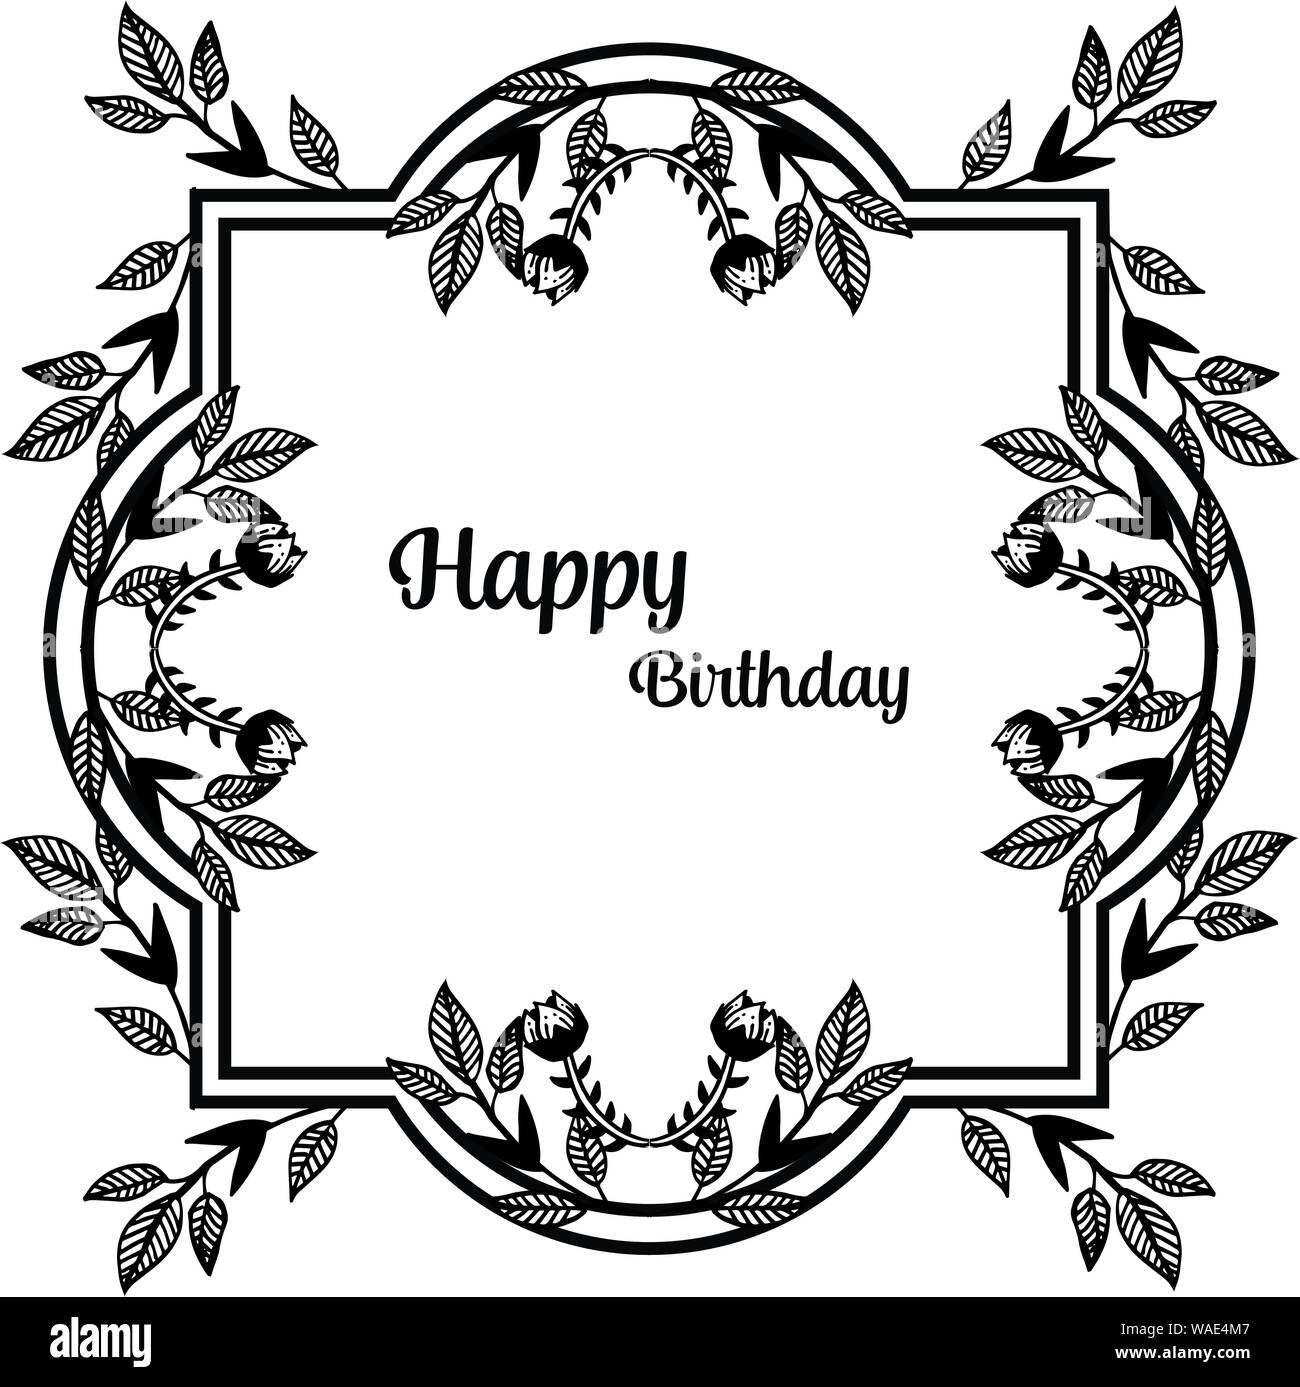 Vintage card happy birthday, texture beautiful wreath frame, isolated ...